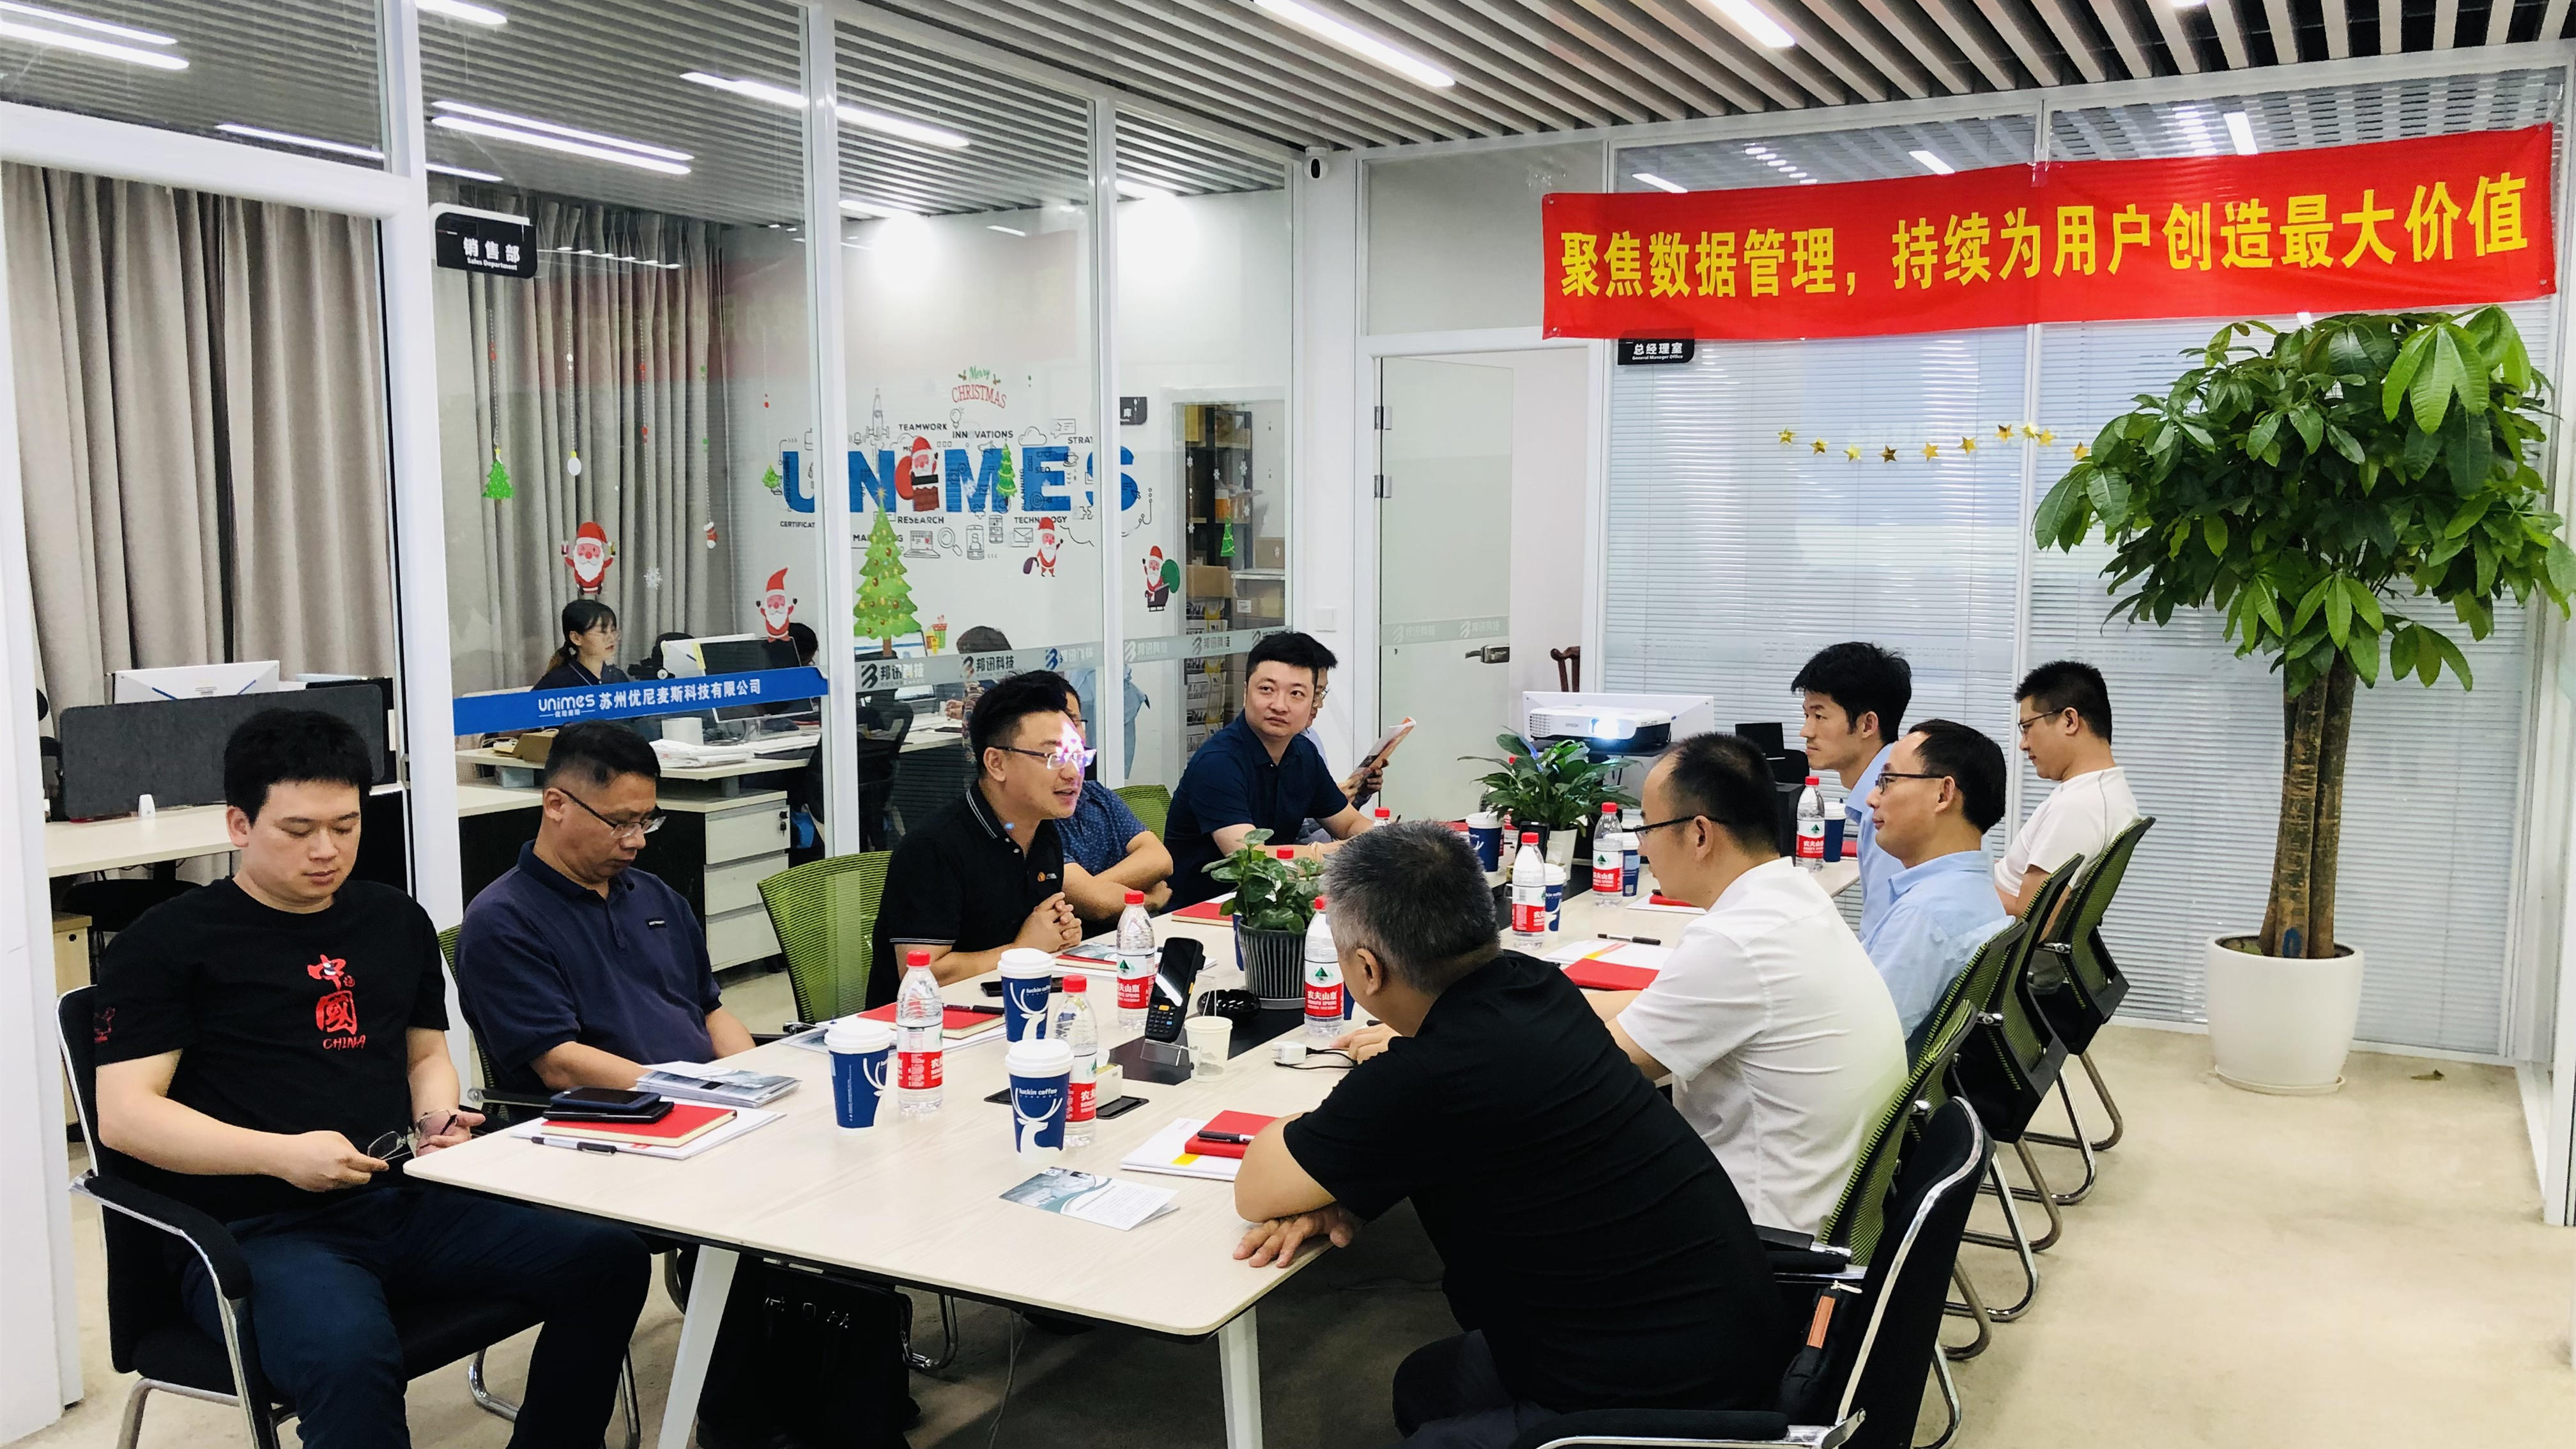 Unimes Hosts Entrepreneurial Salon on Smart Manufacturing and AIDC Hardware Selection